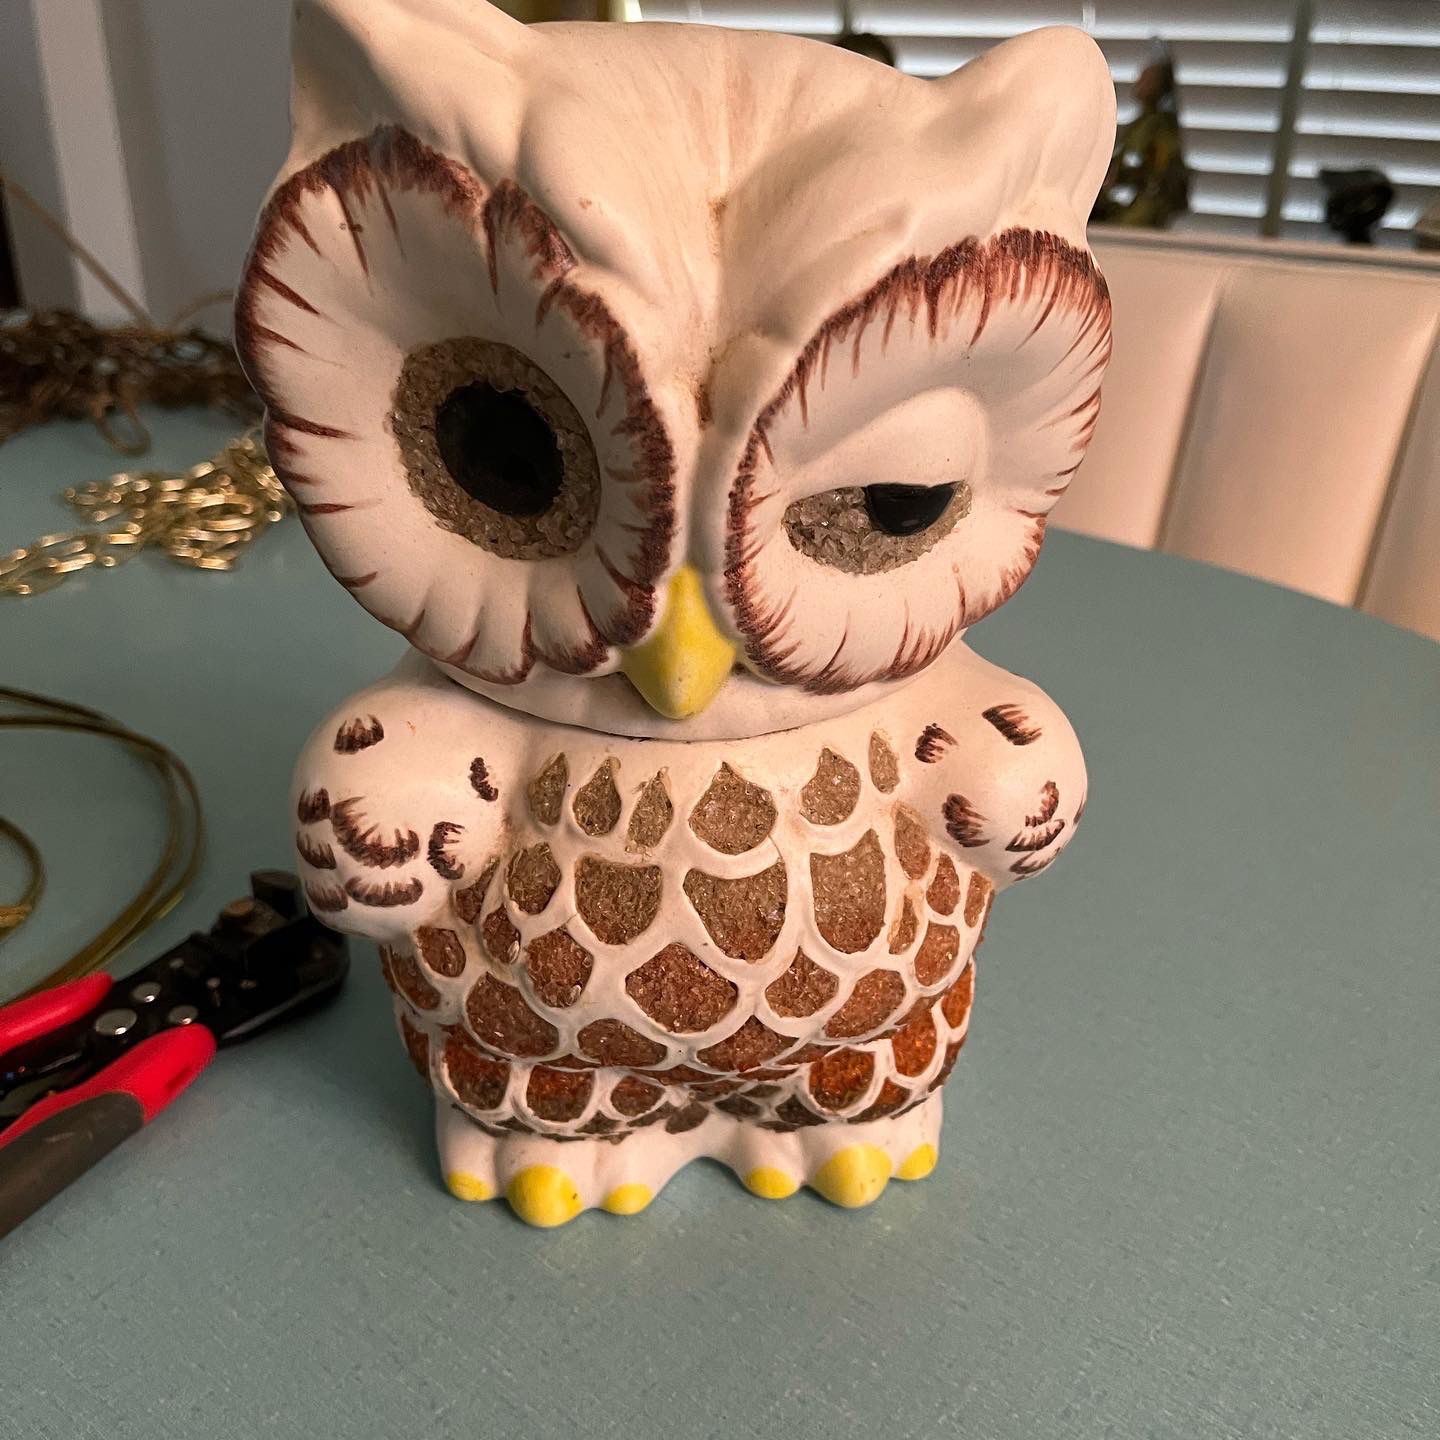 ***PENDING SALE***Vintage Mid Century Modern Pottery Lucite Owl Hanging Swag Lamp